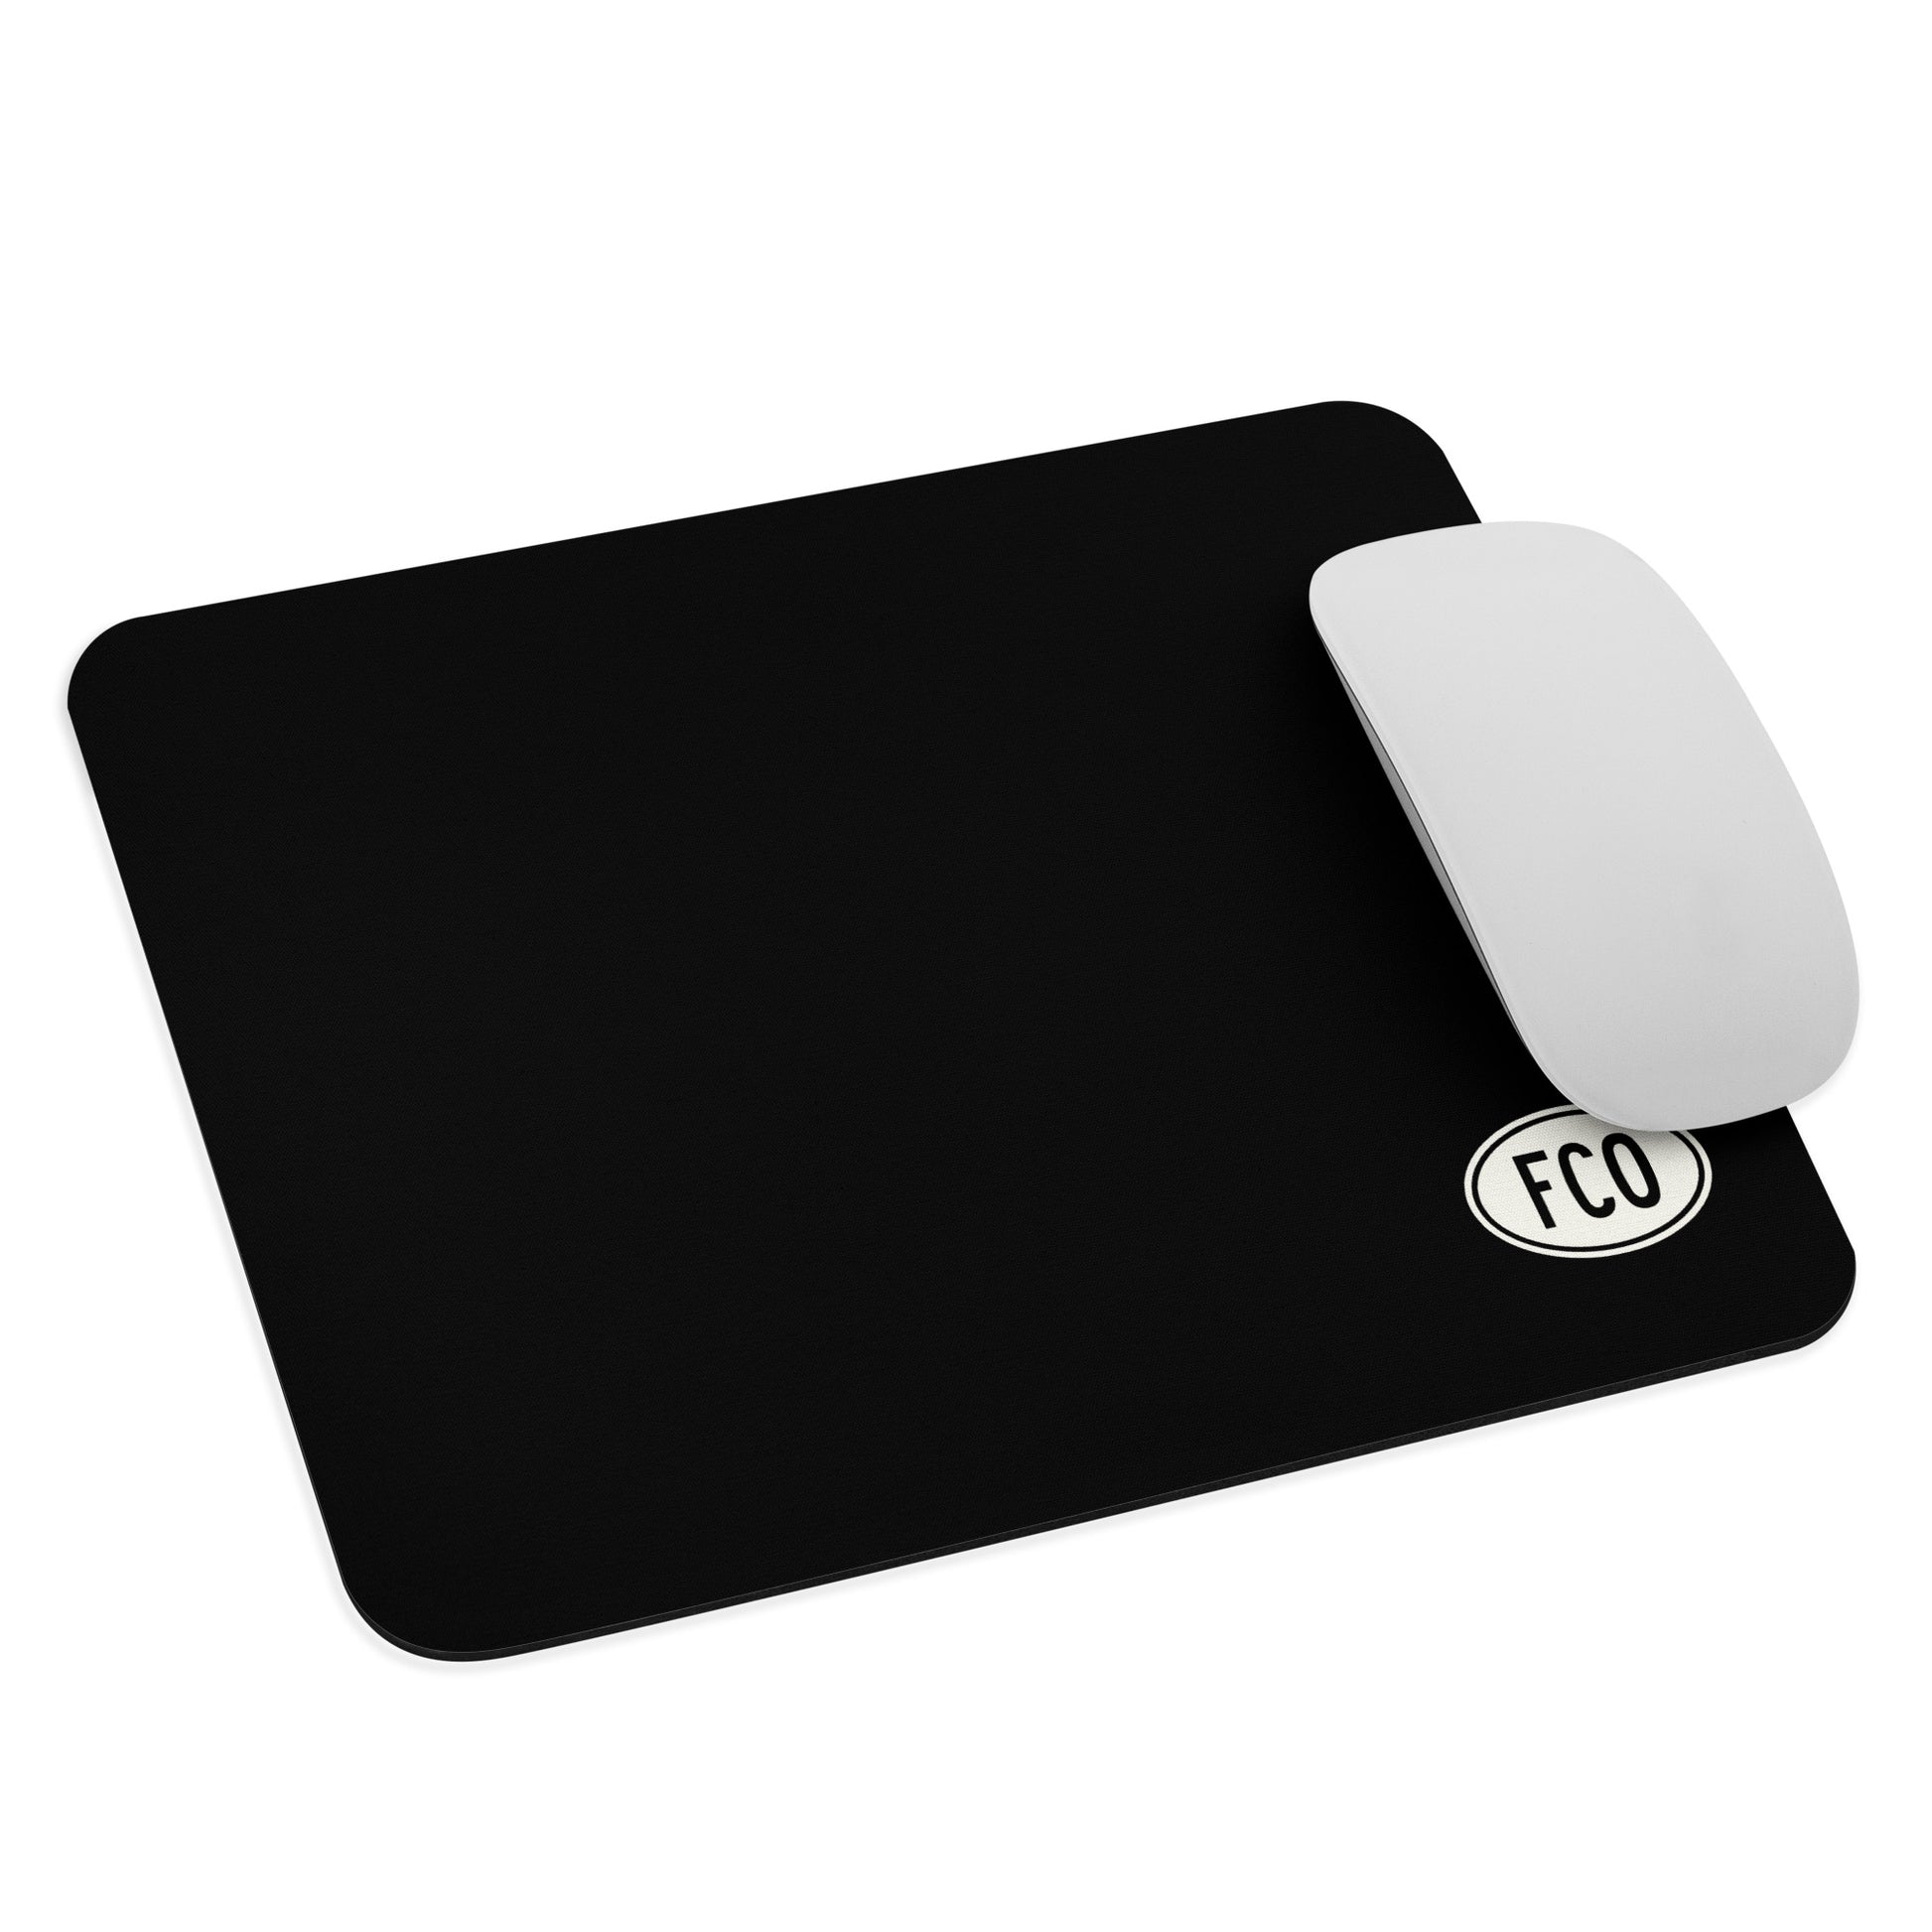 Unique Travel Gift Mouse Pad - White Oval • FCO Rome • YHM Designs - Image 03